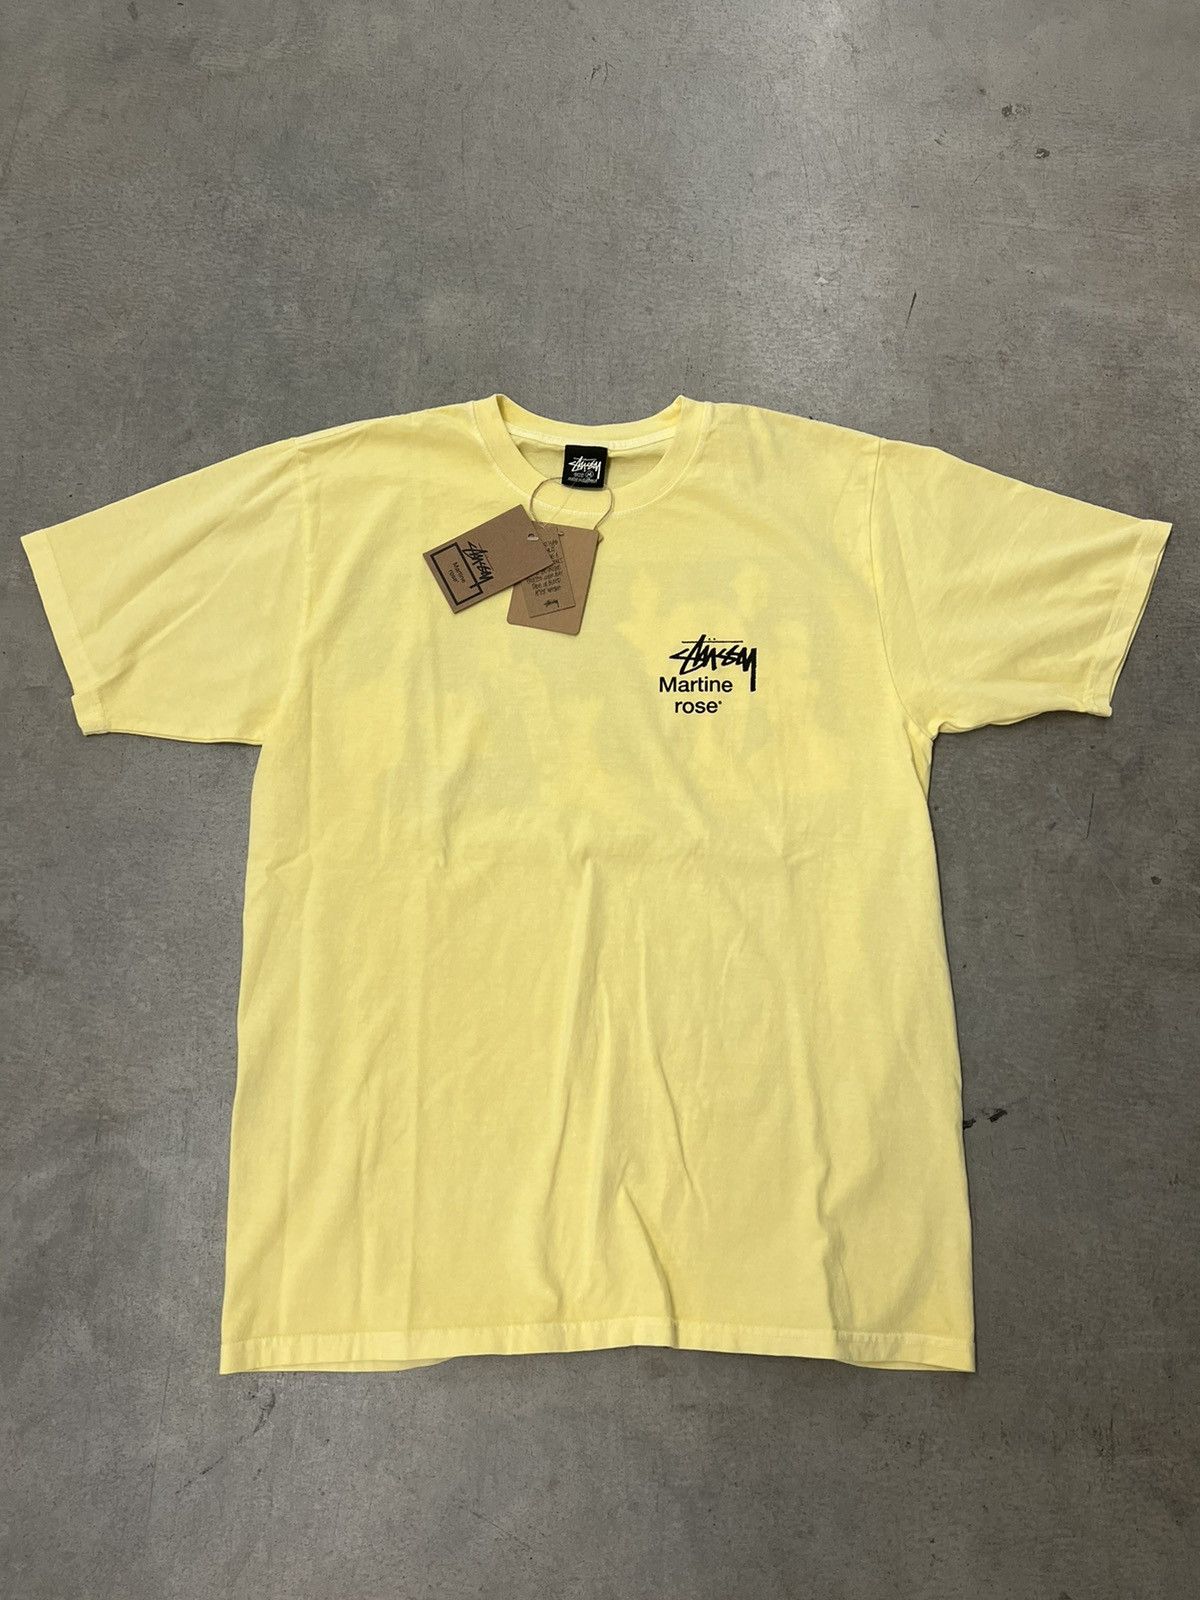 Stussy Stussy x Martine Rose Collage Pigment Dyed Tee Lemon | Grailed